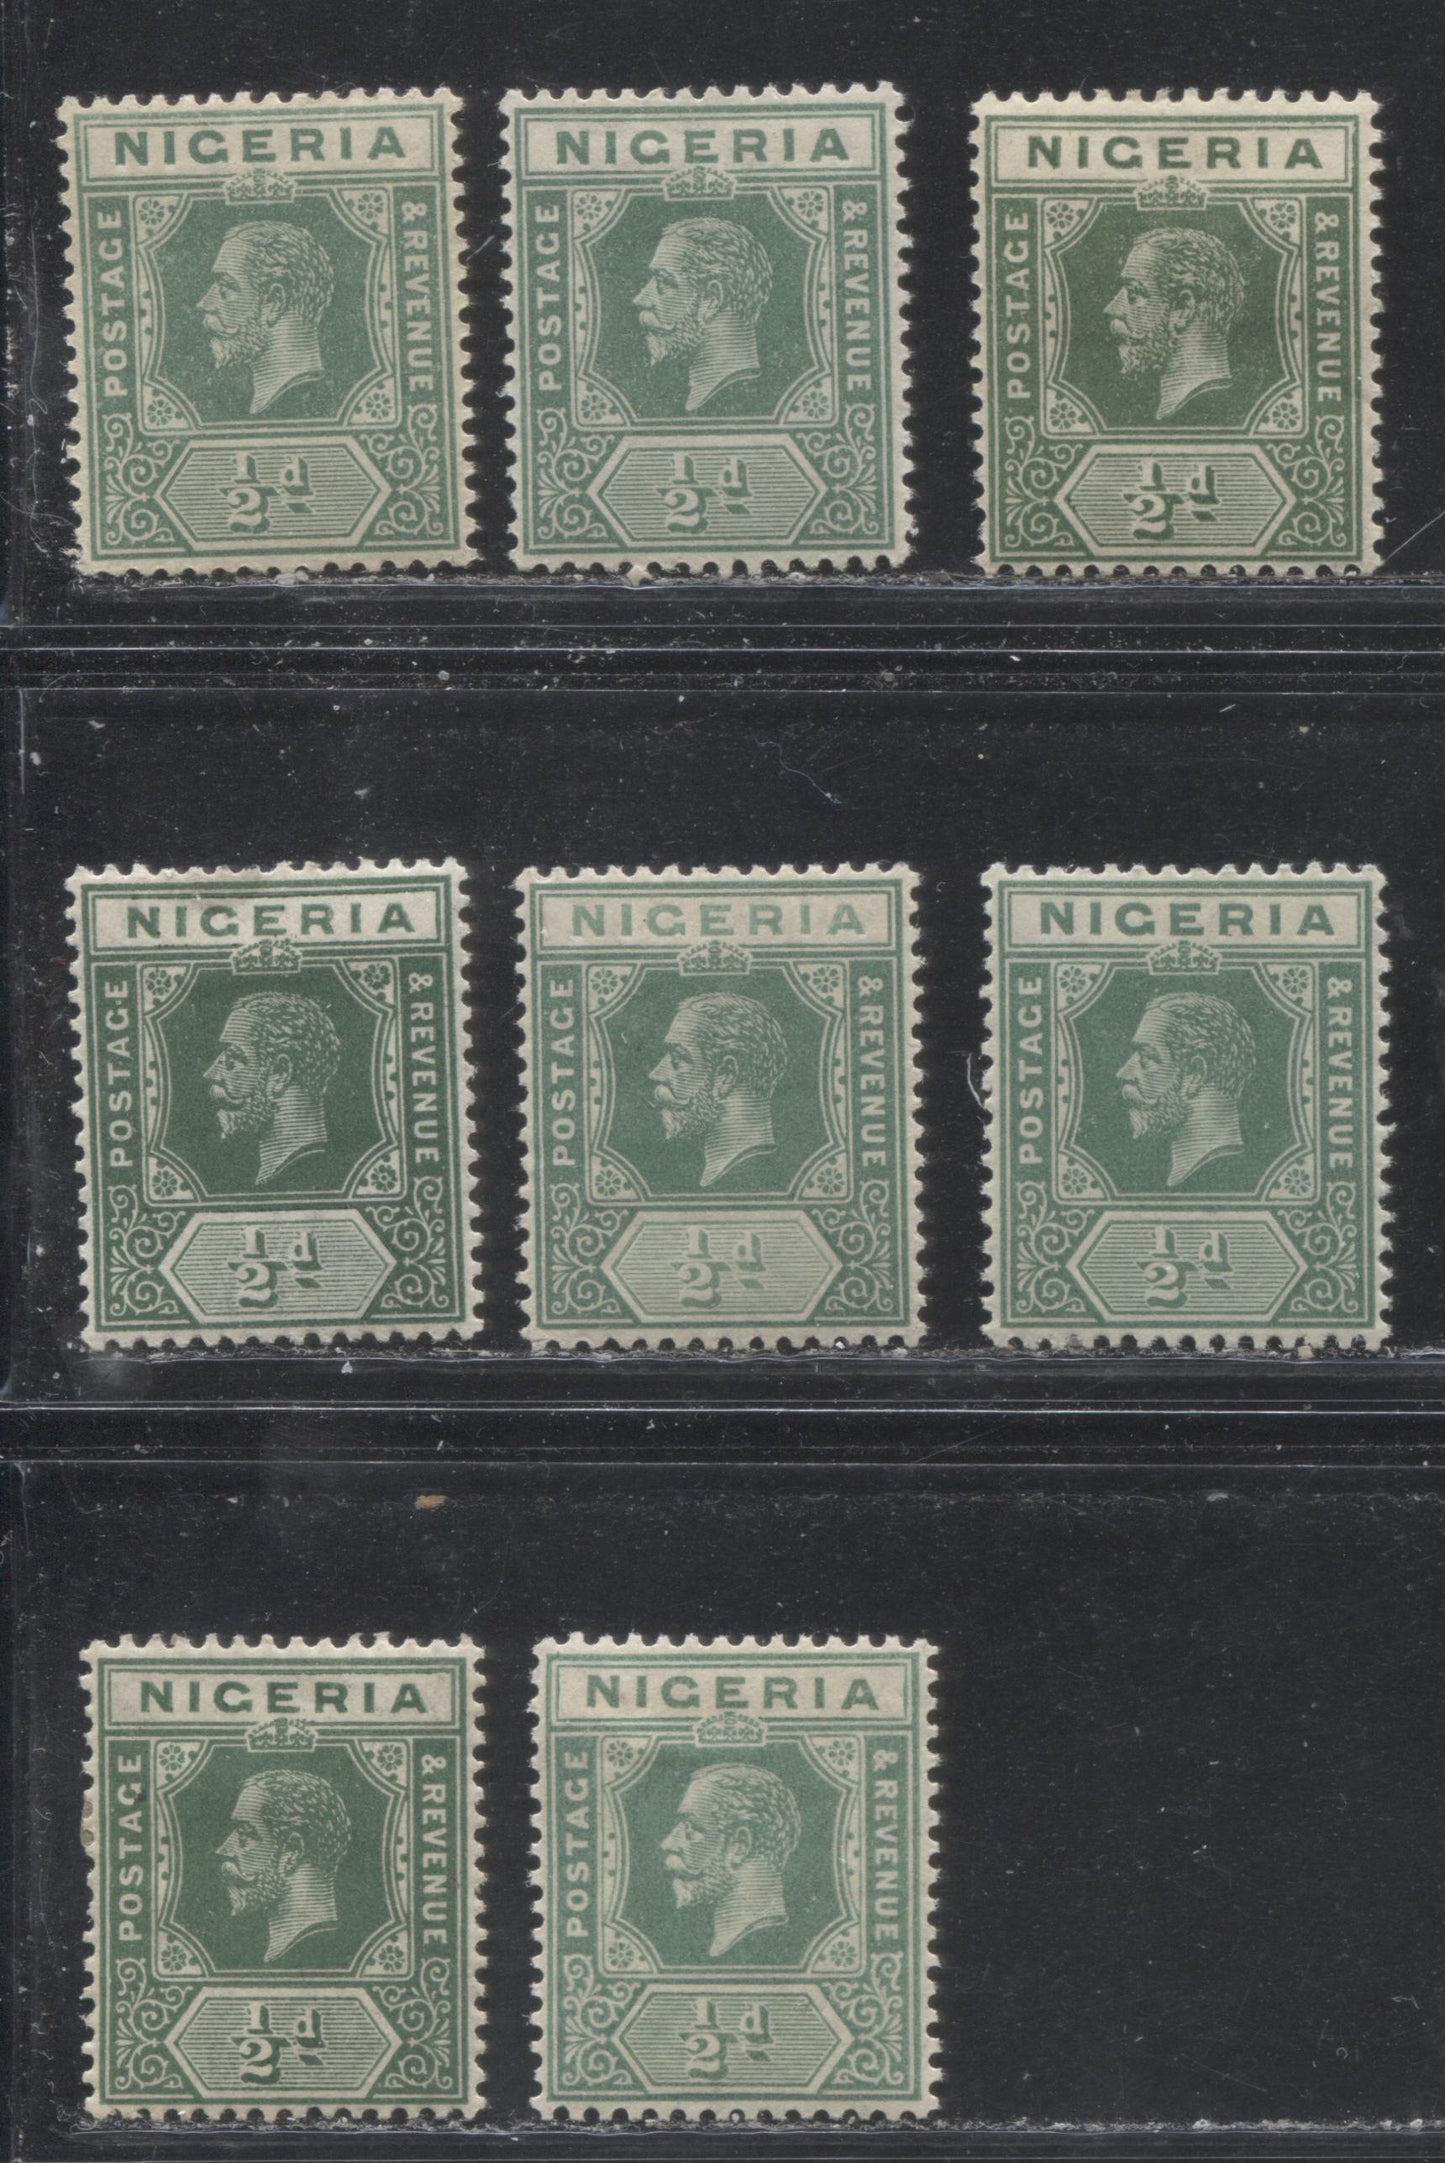 Lot 230 Nigeria SG# 15 1/2d Green, Pale Green & Myrtle Green King George V, 1921-1932 Multiple Script CA Imperium Keyplate Issue, Eight VFOG Examples, Die 1, All From Different Printings, With Different Head and Duty Plate Shades